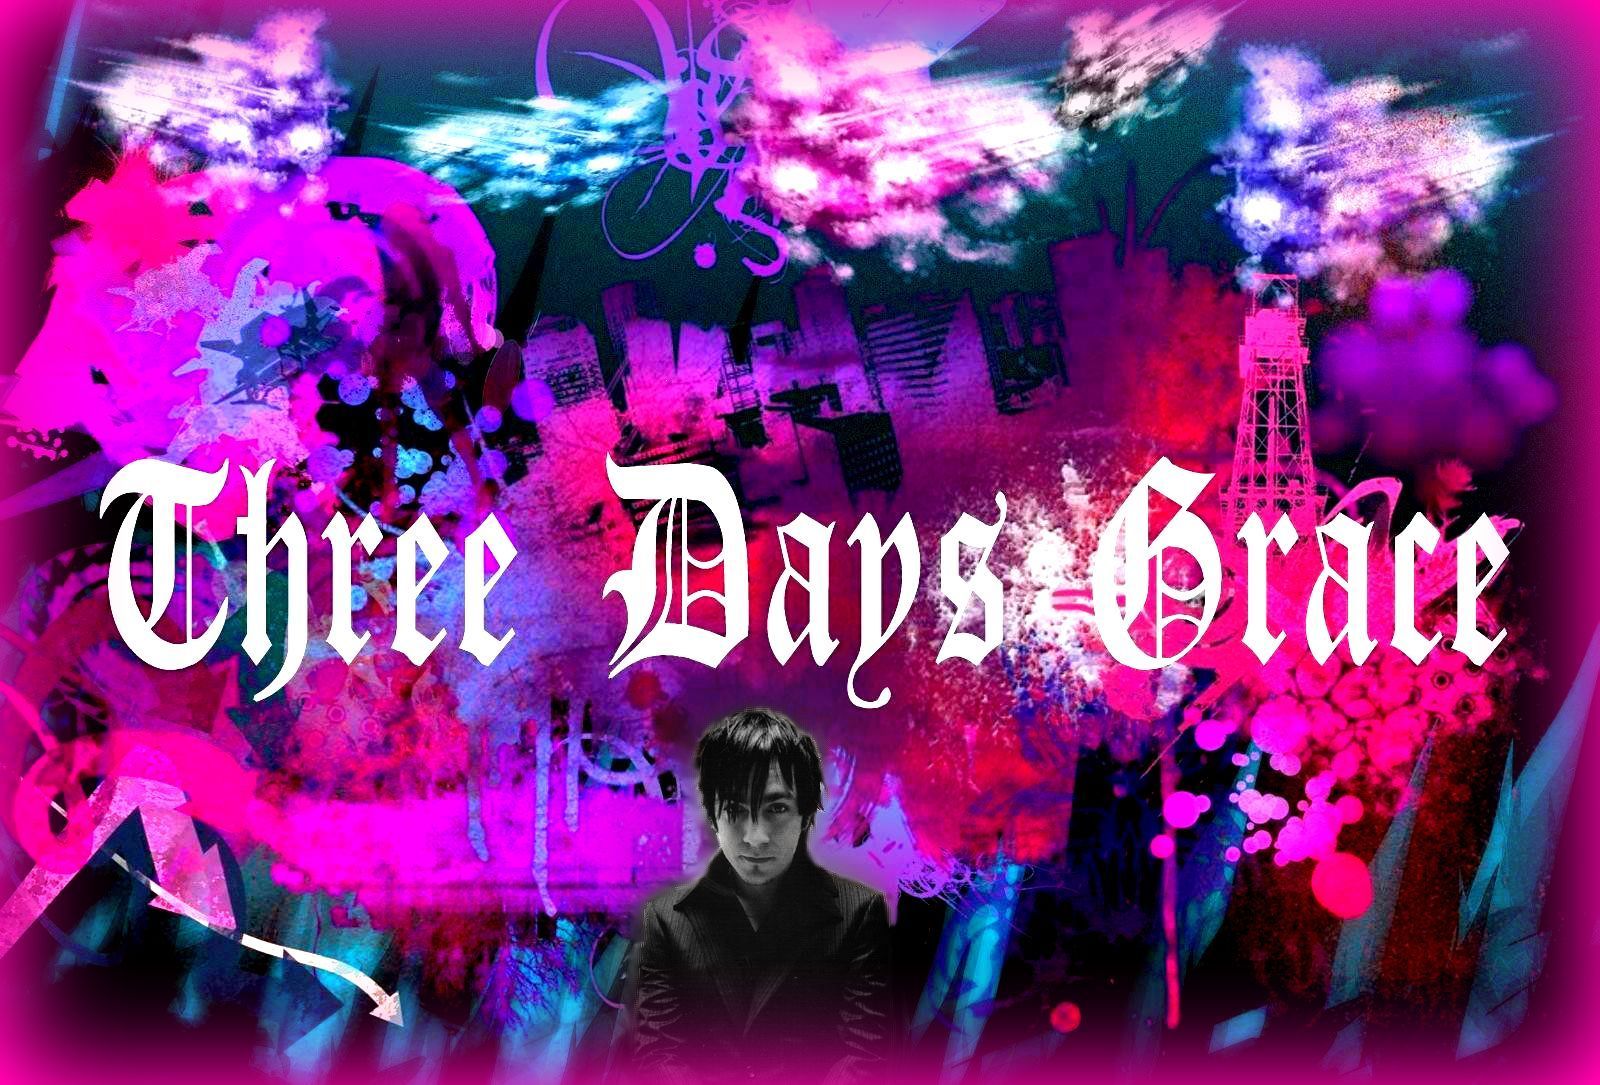 Three Days Grace Wallpapers